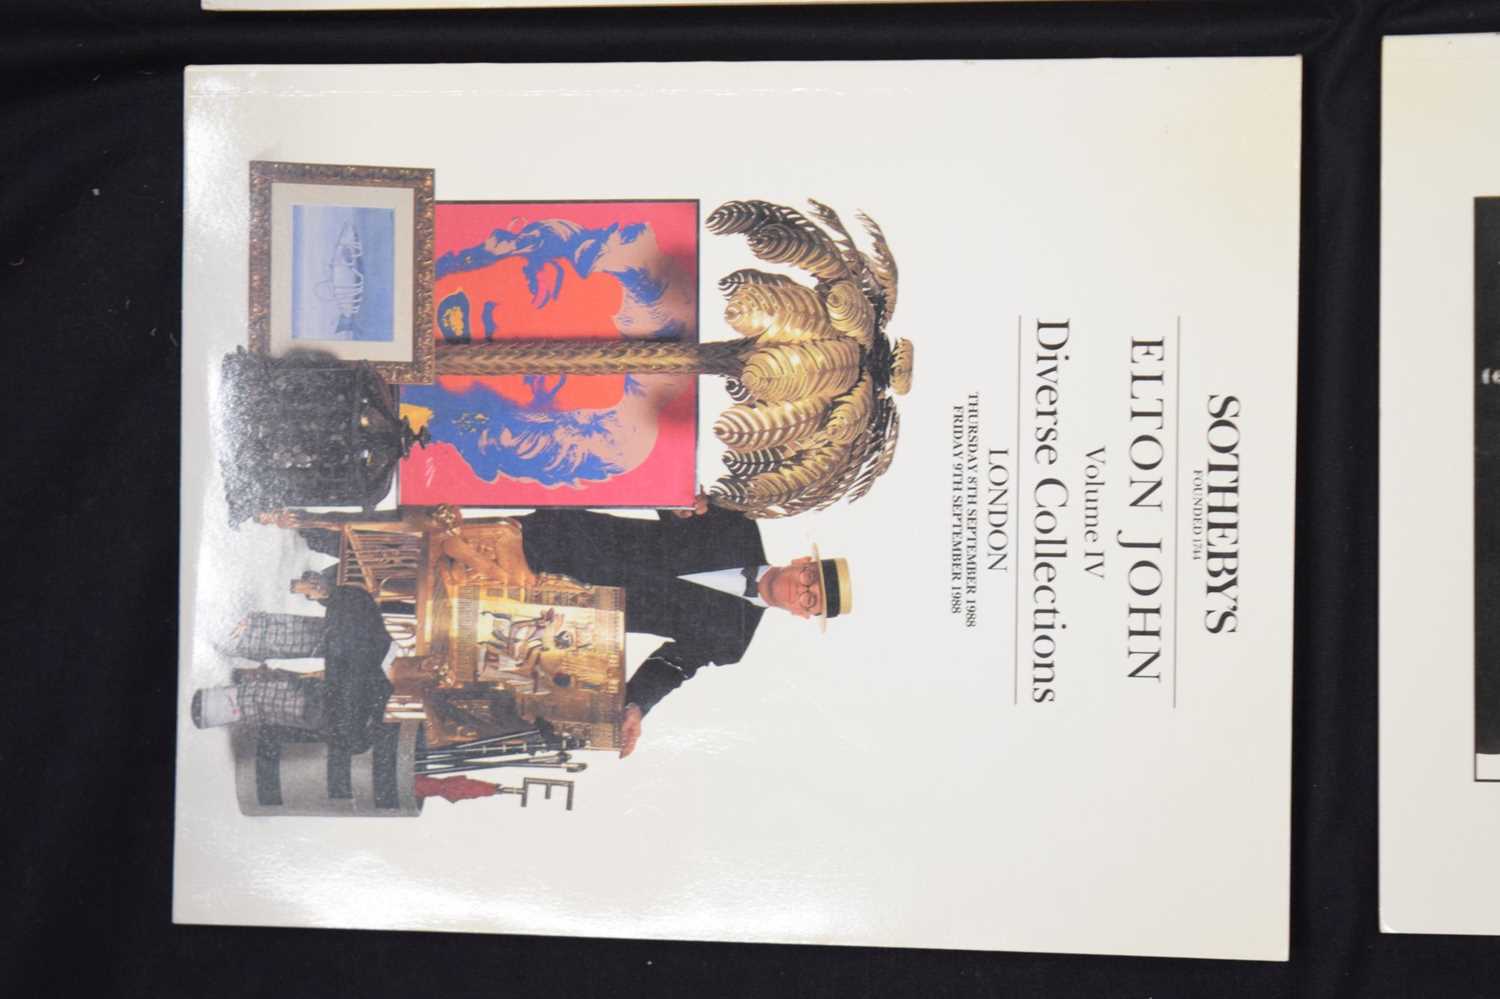 Sotheby's Elton John auction catalogue set from 6th-9th September 1988 - Image 9 of 9